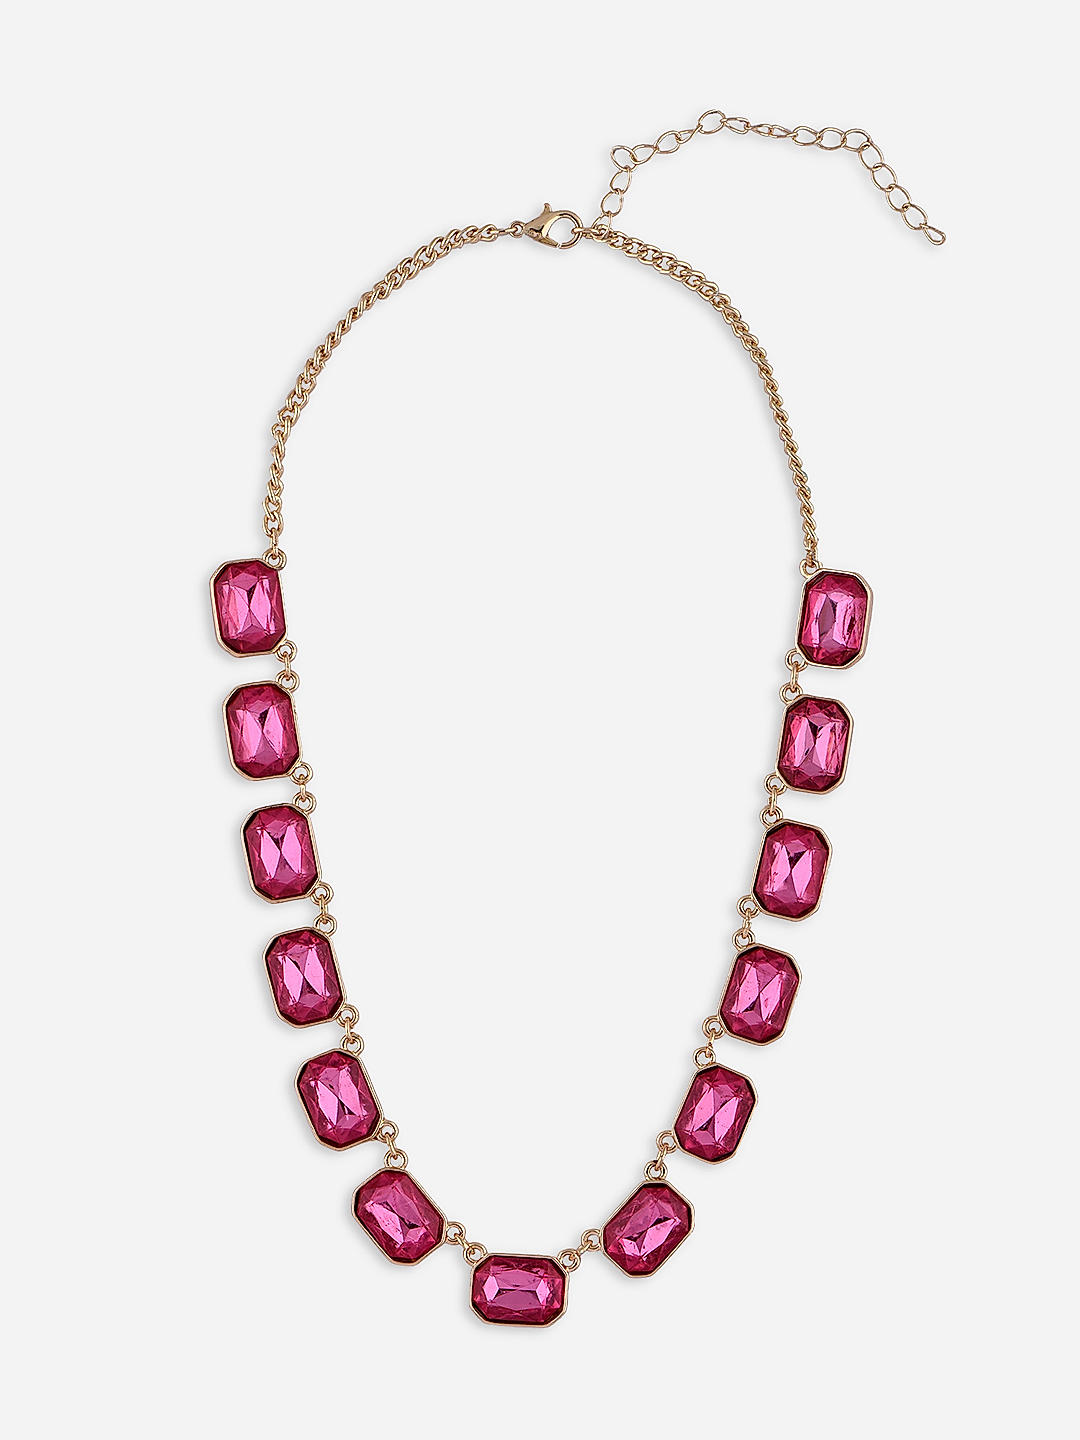 Pink Necklace - Buy Pink Necklace Online in India